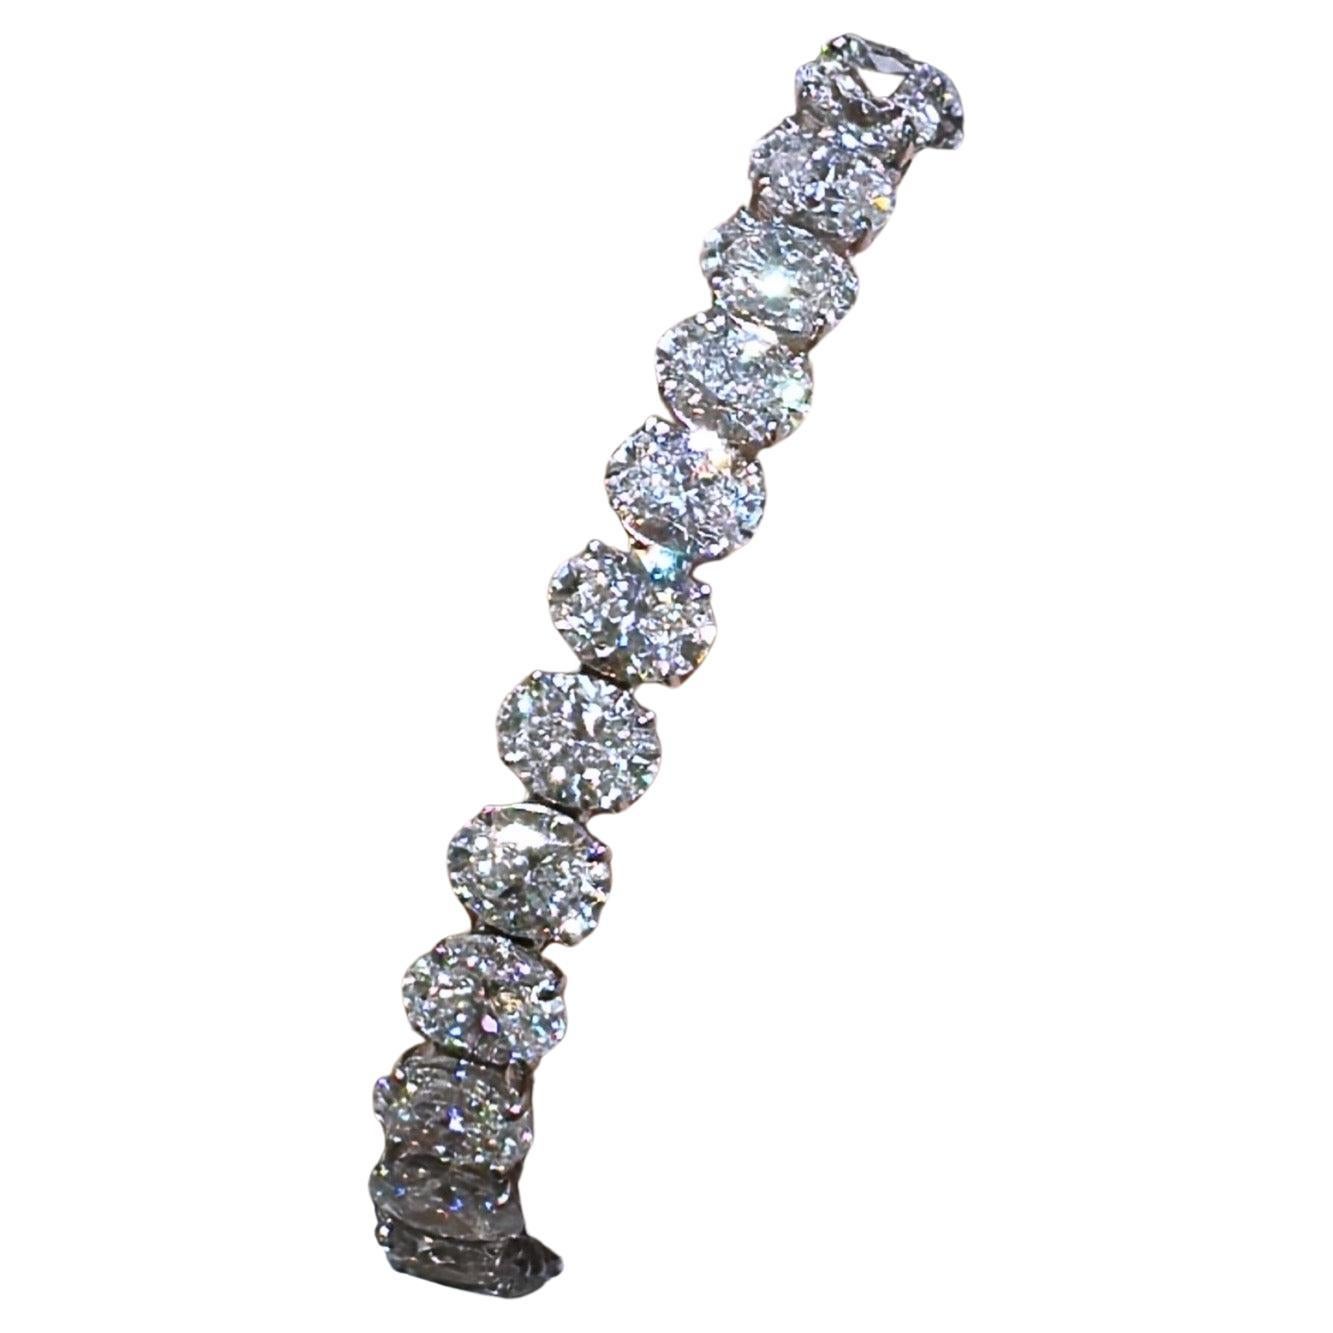 Daniella Design SKU: 127778
Oval cut diamond riviera line tennis bracelet is absolutely amazingly crafted in luxurious Platinum and made with 33 oval-cut diamonds of each GIA-certified stone 23.19carats! True fit for a queen. Everyone will gasp with